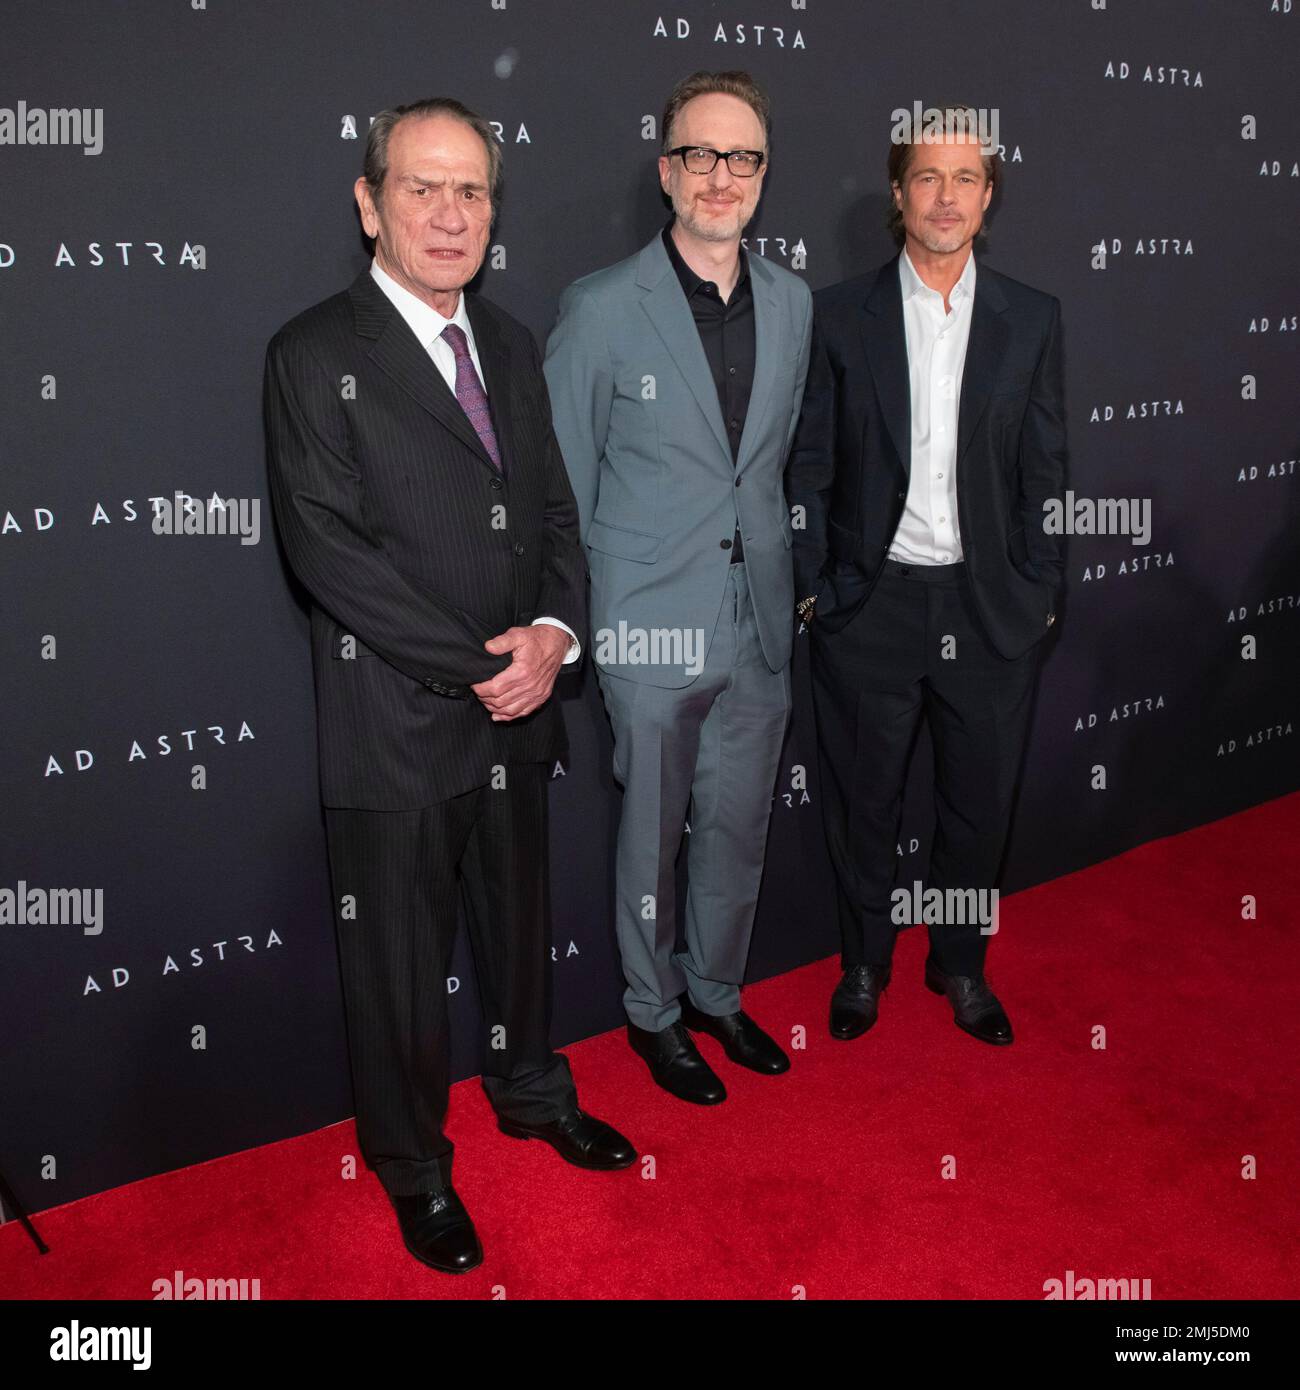 Actor Tommy Lee Jones, from left, director James Gray, and actor Brad Pitt  attend a special screening of "Ad Astra" at the National Geographic Museum  on Monday, Sept. 16, 2019, in Washington. (